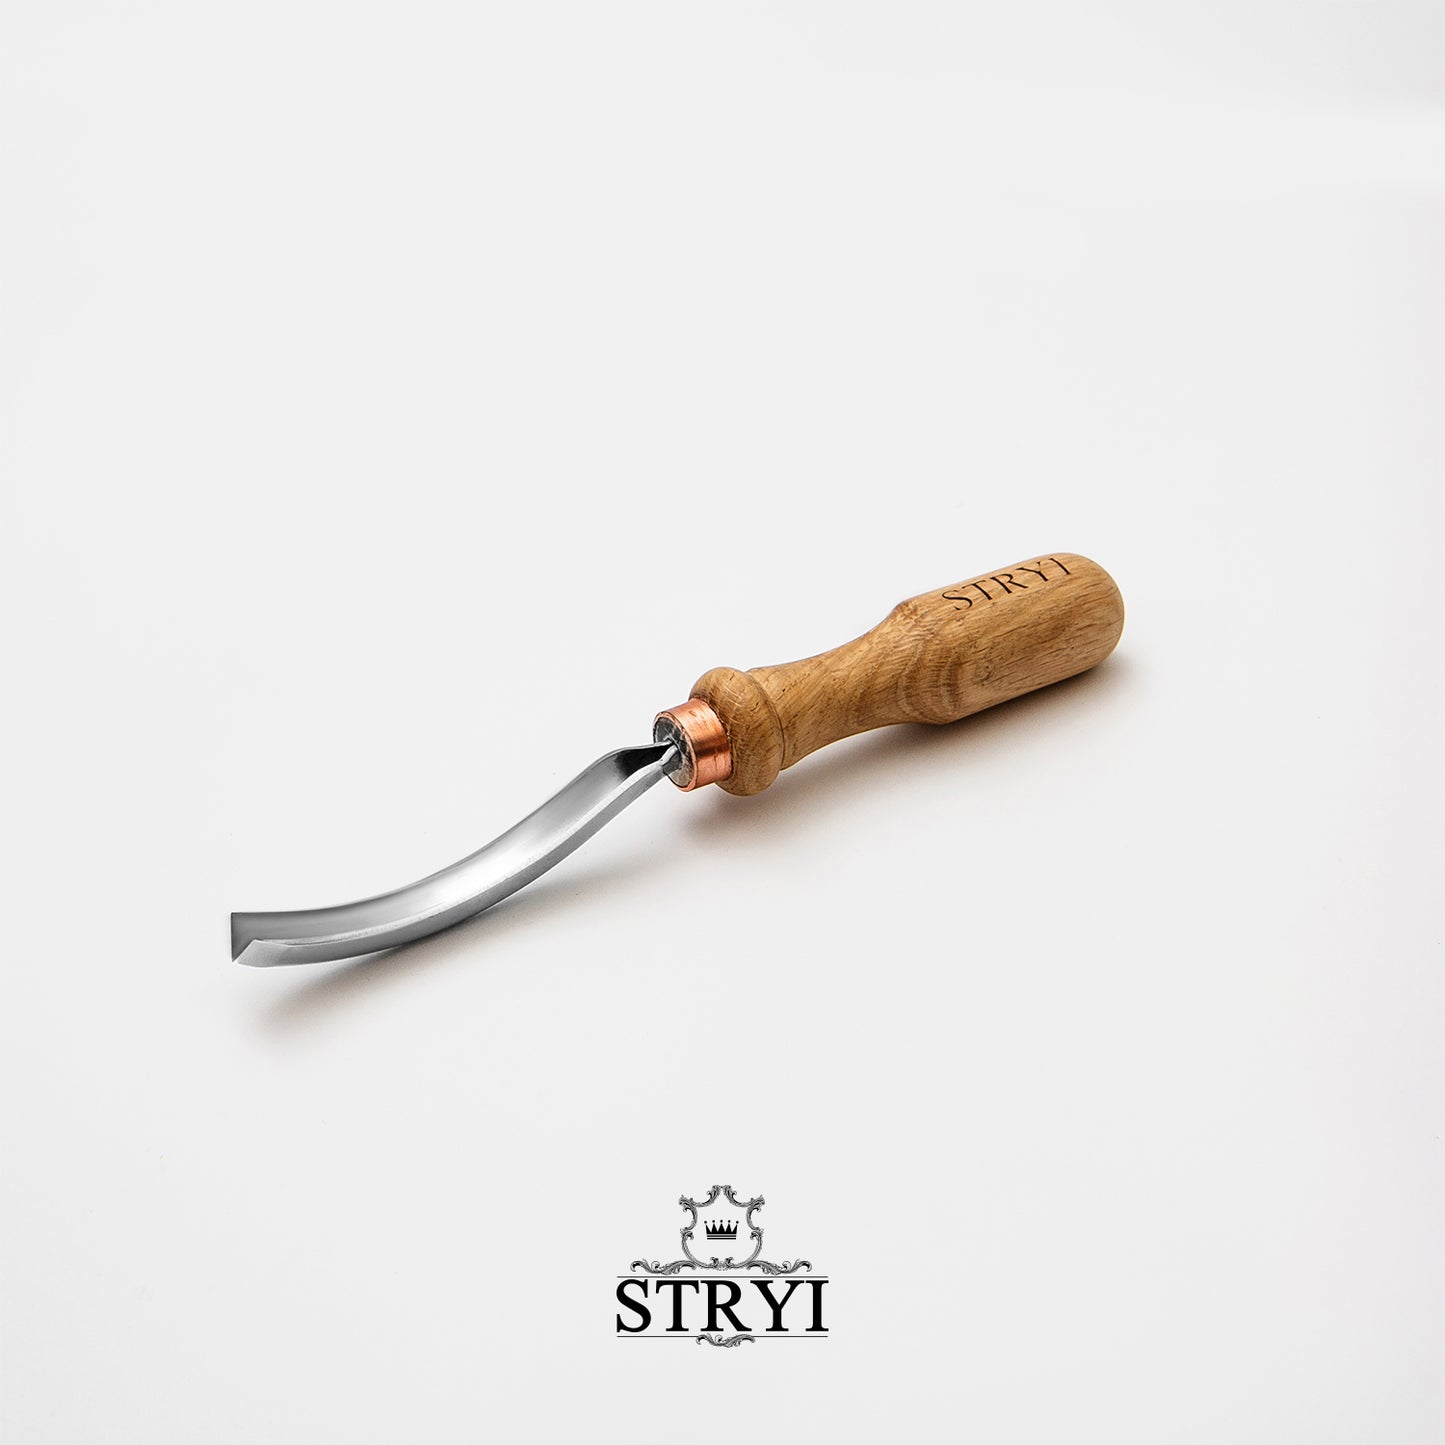 Long Bent V-parting Chisel STRYI Profi #, 60 degrees, V-parting chisel, Relief carving